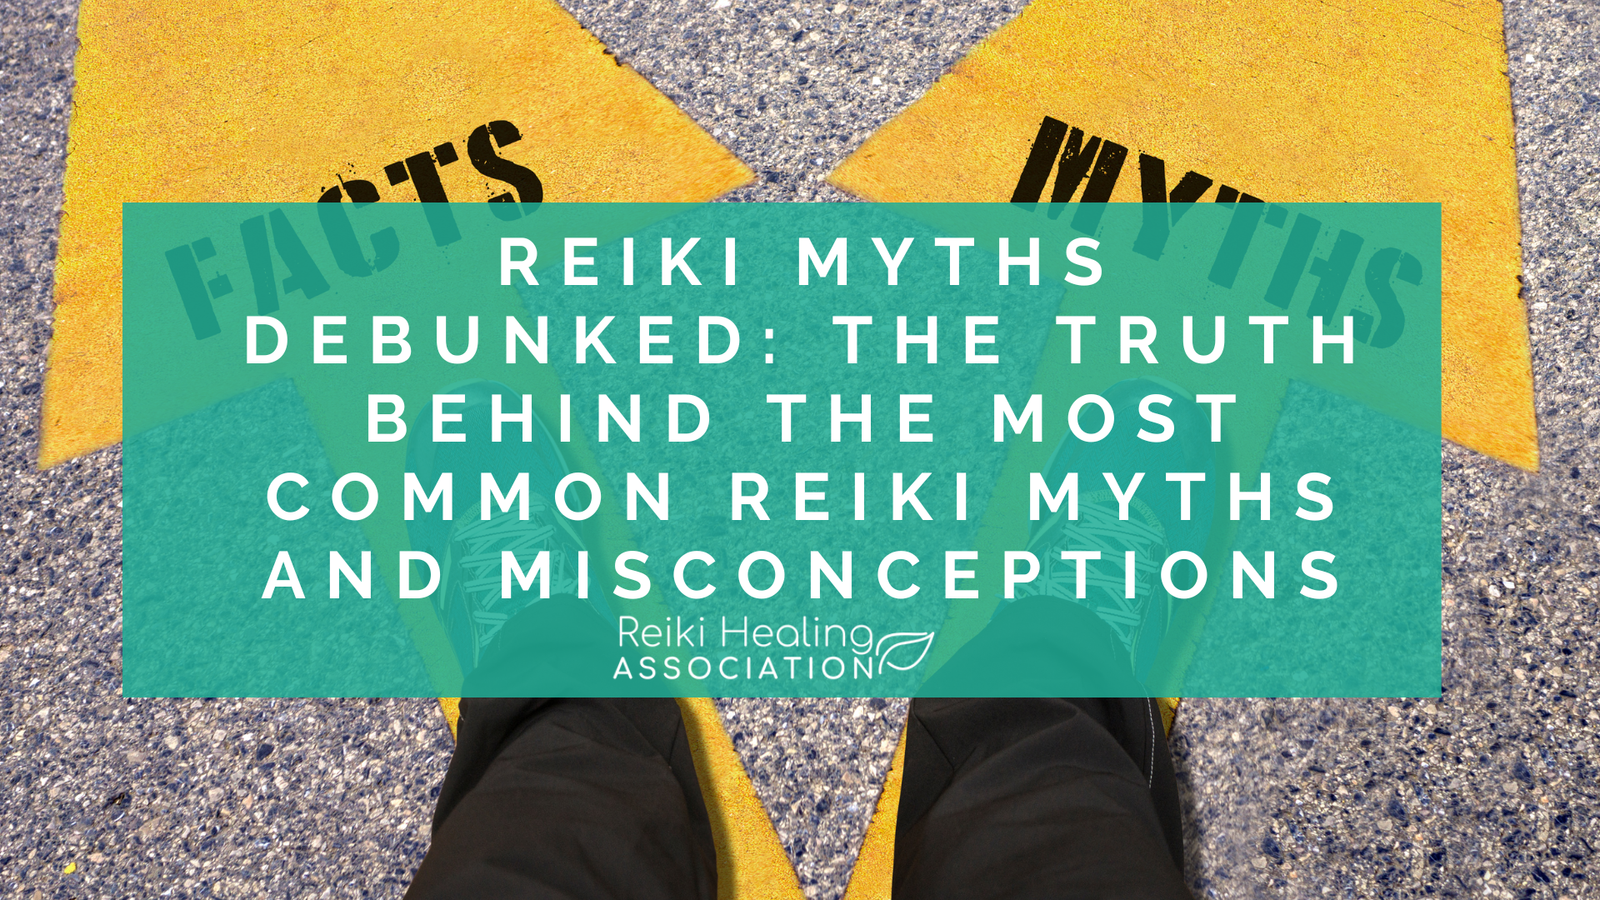 7 Reiki Myths Debunked: The truth behind the most common Reiki myths and misconceptions